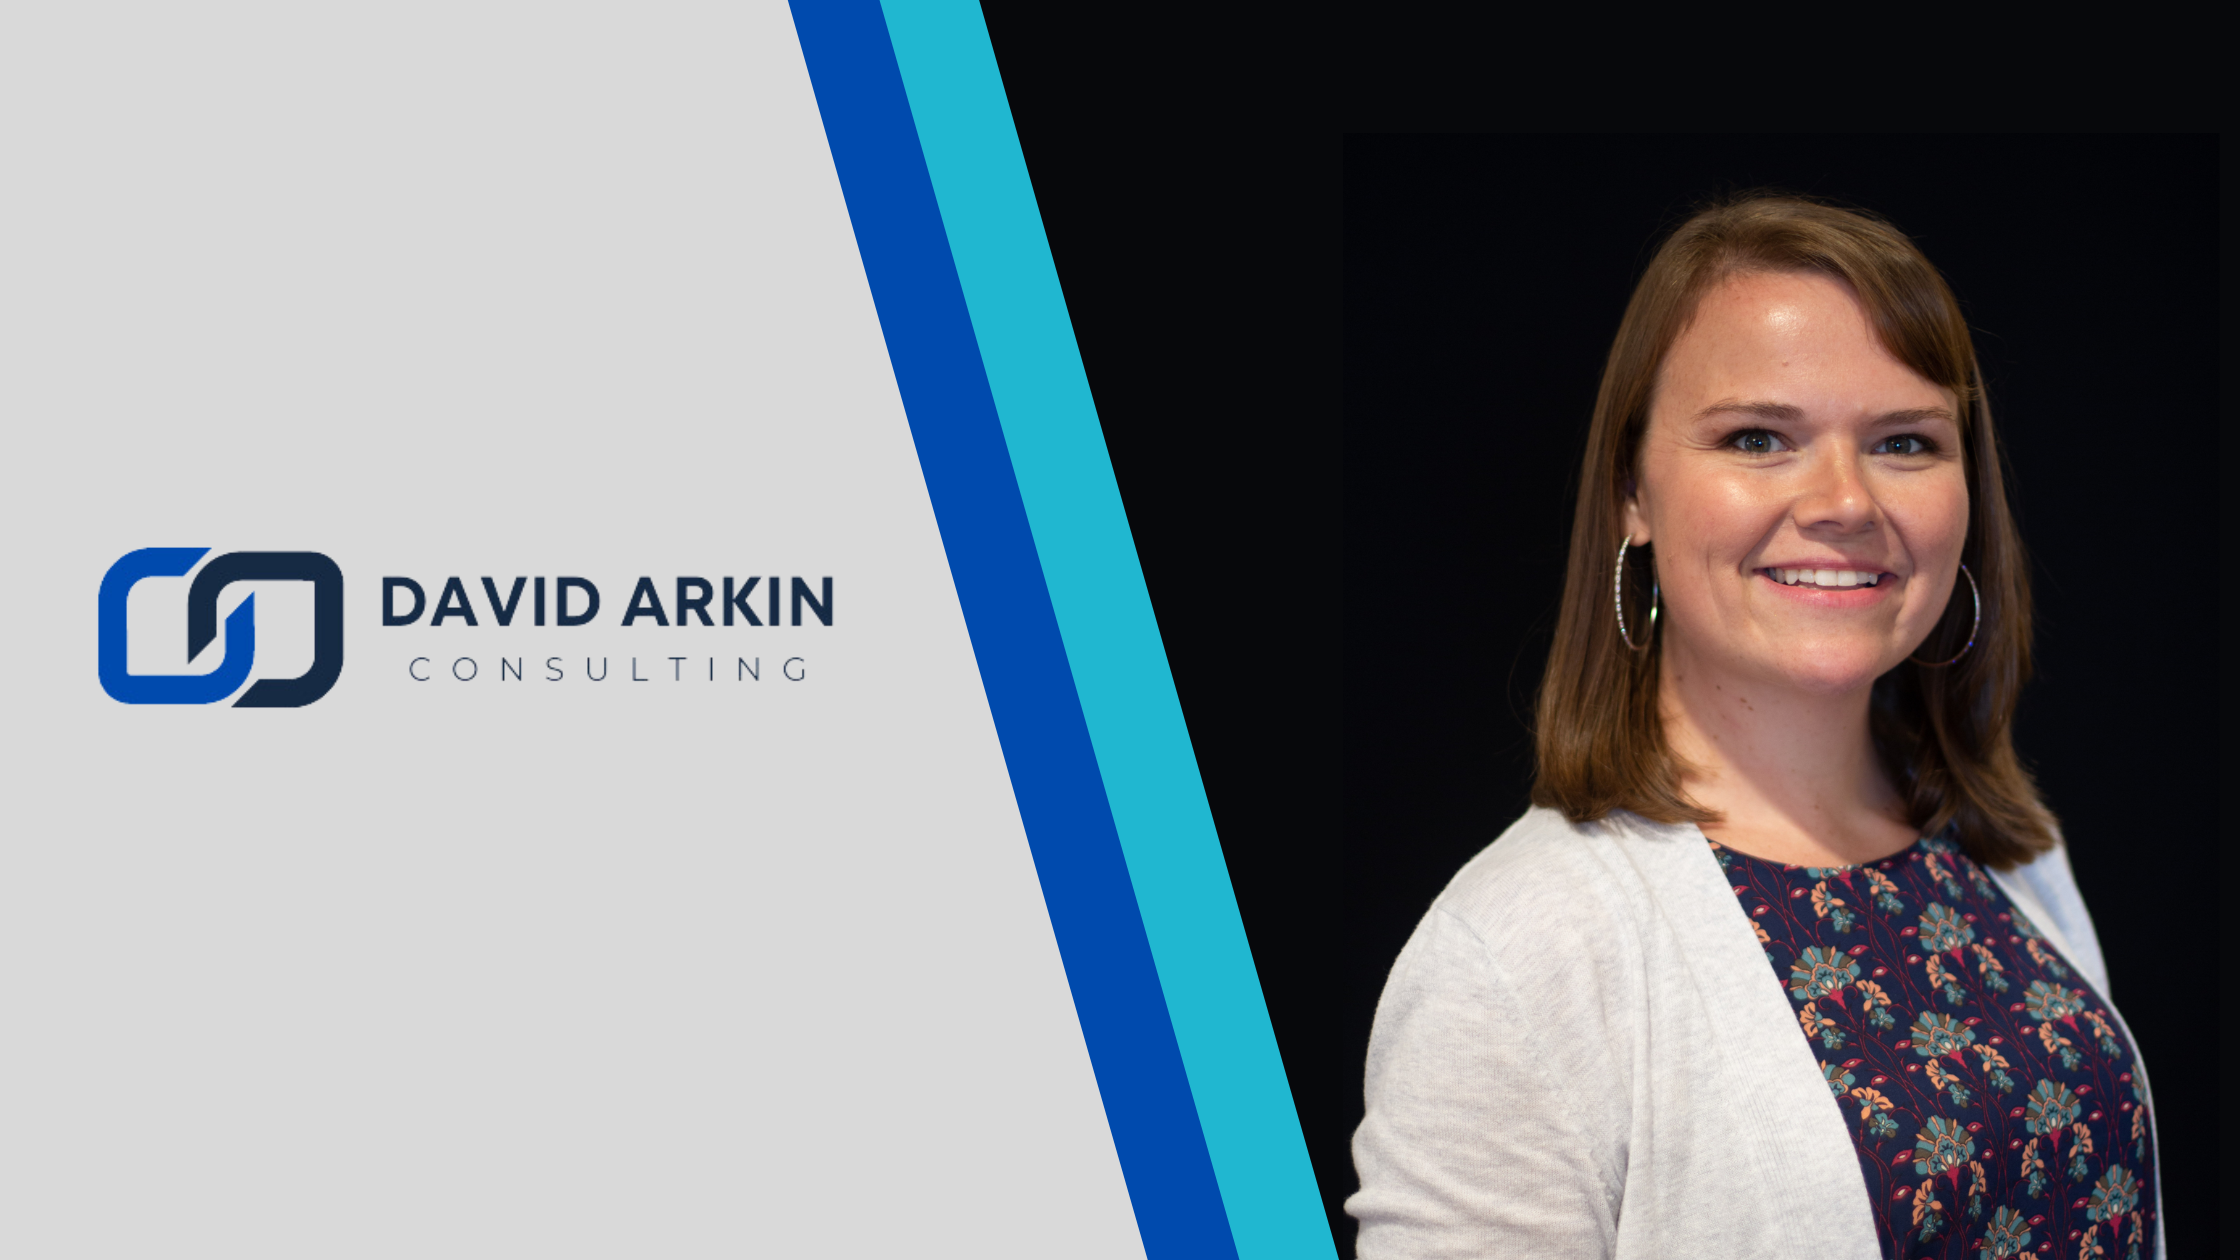 Featured image for “Social media, digital audience growth expert Emilie Lutostanski joins David Arkin Consulting”